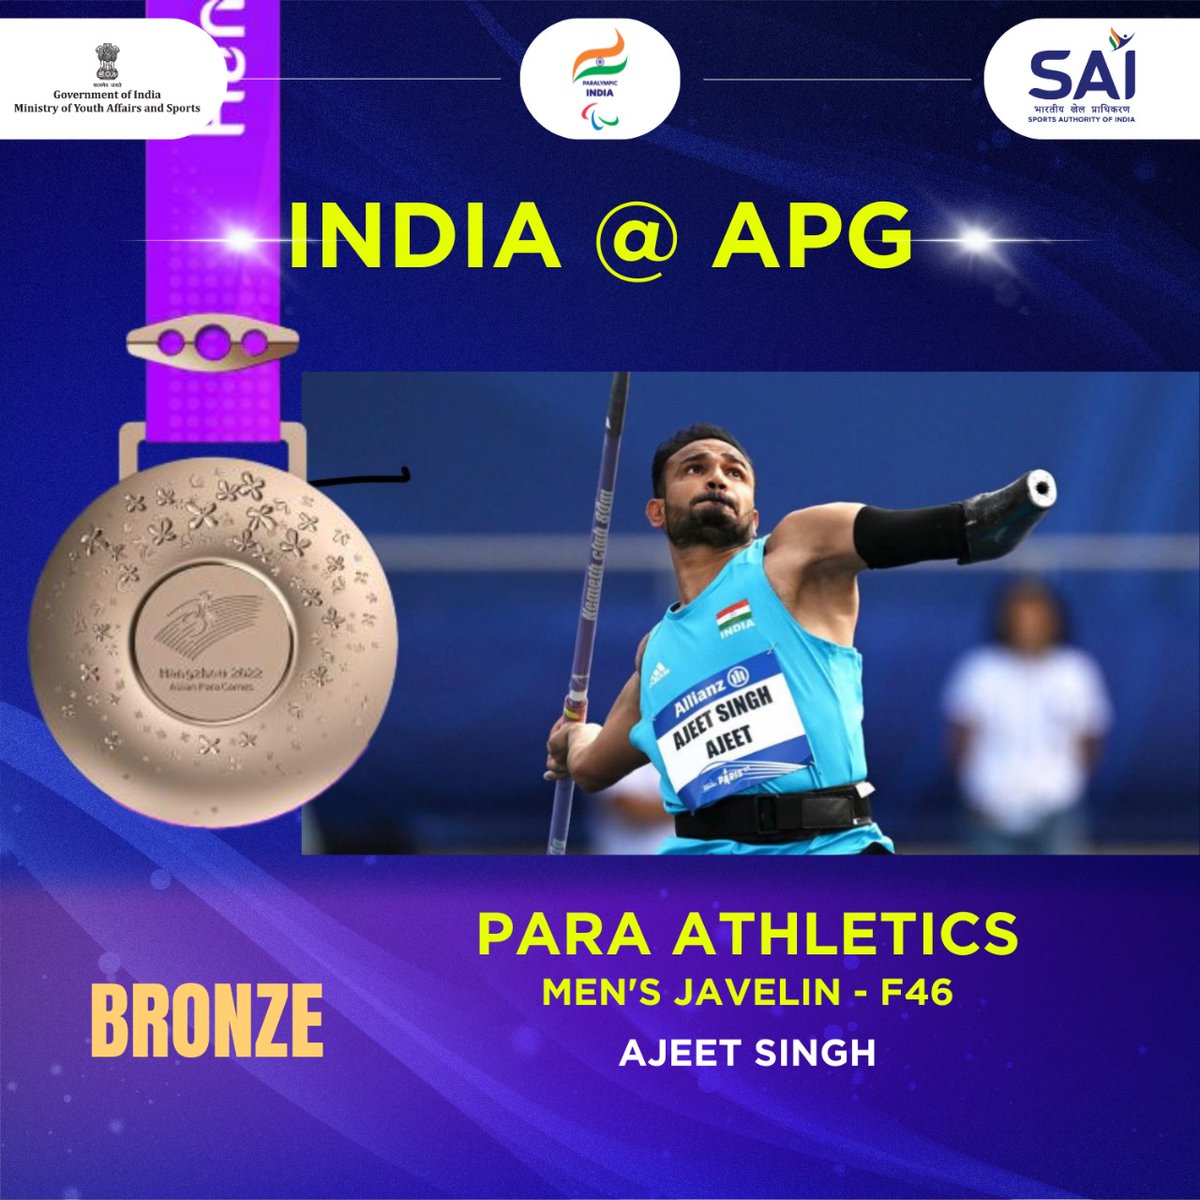 Top 3 podium finishes by our Men's F-46 #Javelin team on Day 3 of #AsianParaGames2022. @SundarSGurjar GOLD (68.60m) set a new World & Asian Record @RinkuHooda001 SILVER (67.08m) & @AjeetSinghYadv BRONZE (63.52m) also achieved Games Records. Three cheers for the incredible trio!